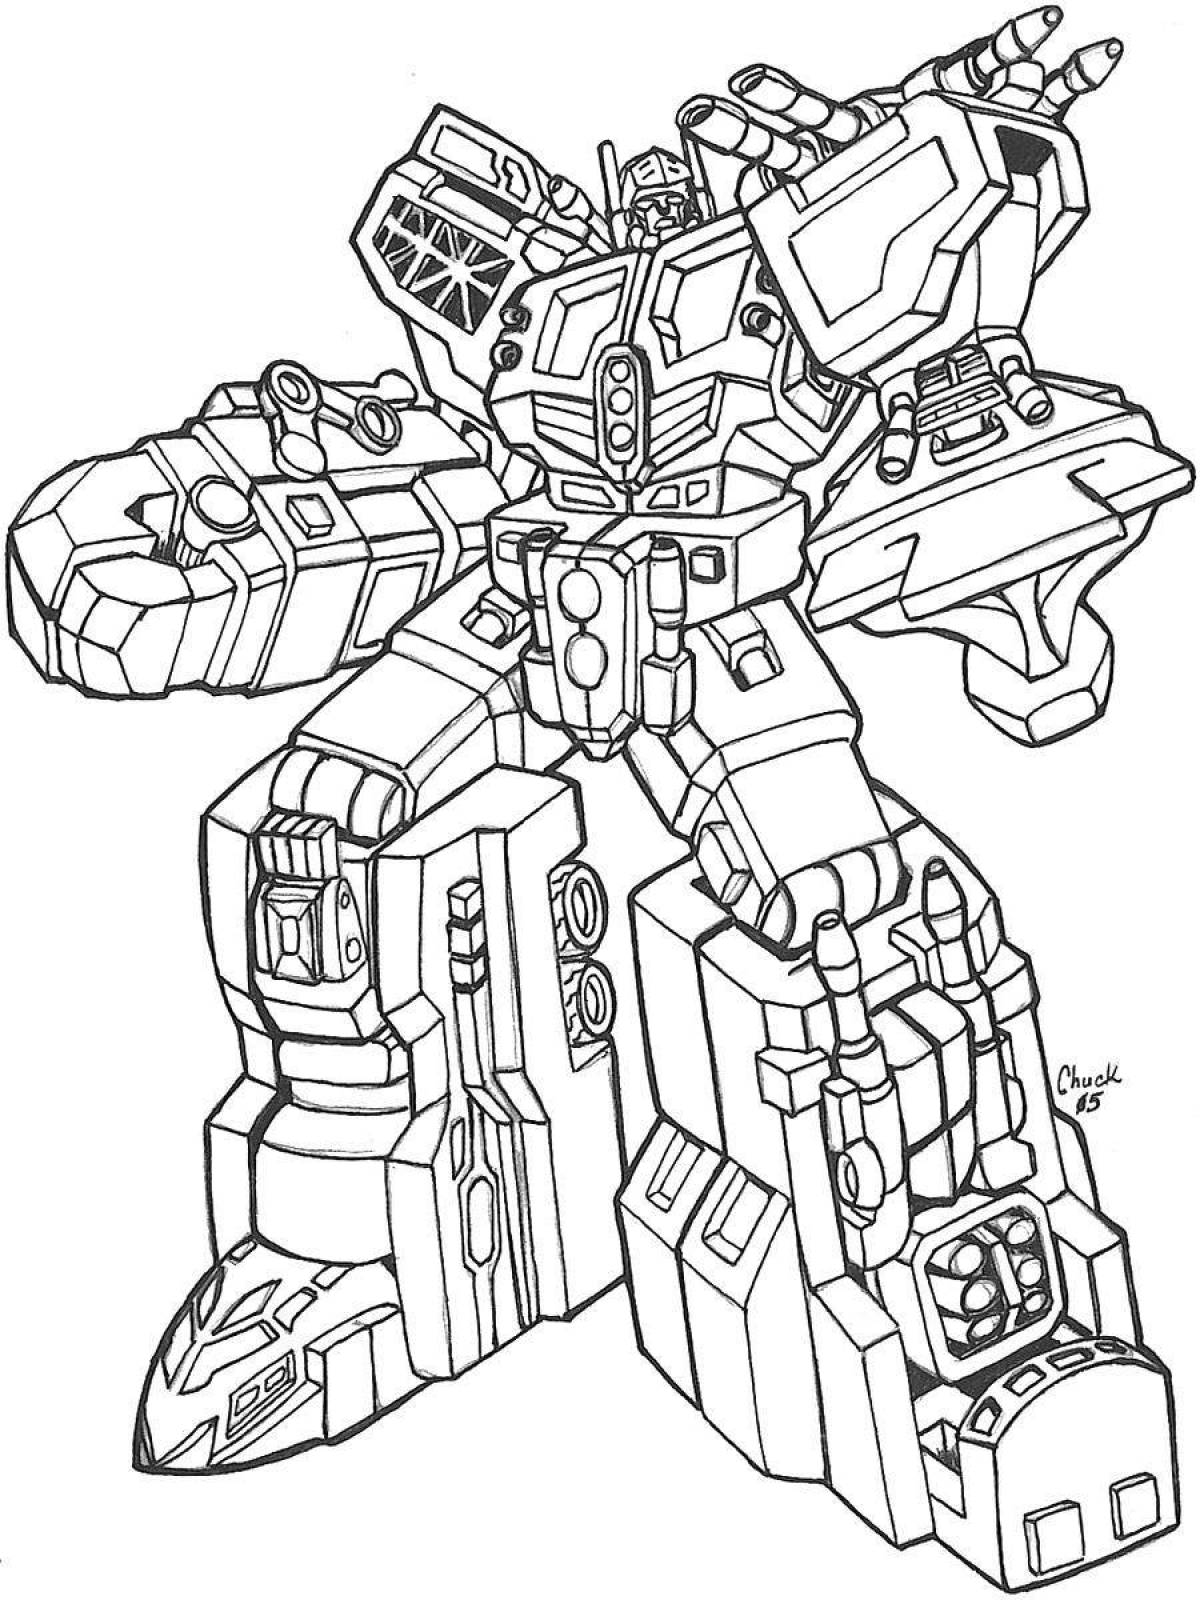 Coloring Autobots for kids